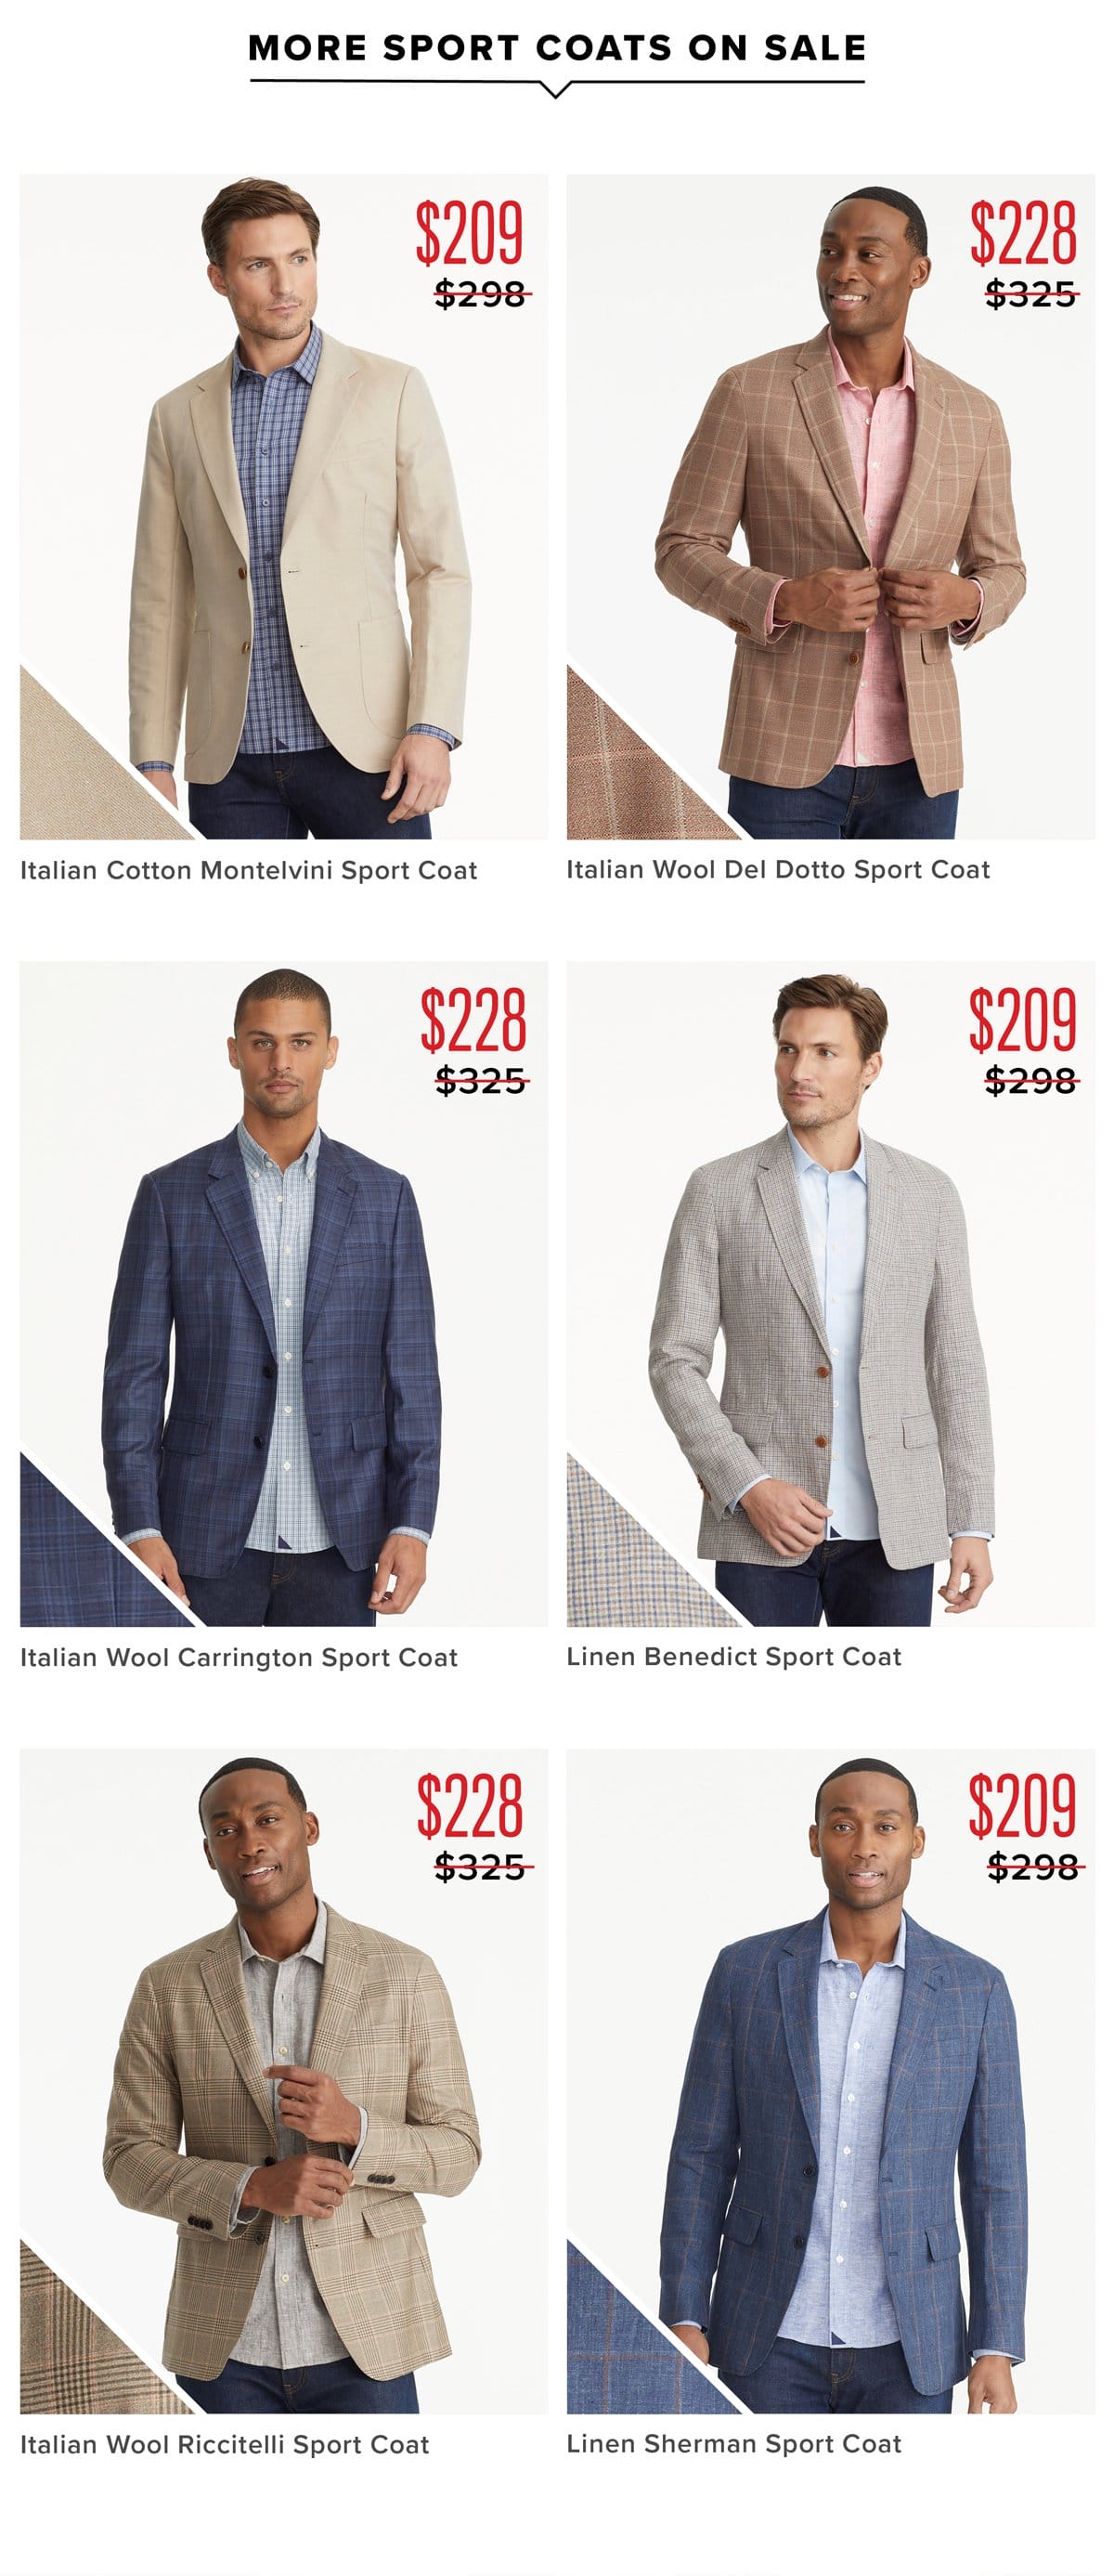 More Sport Coats On Sale